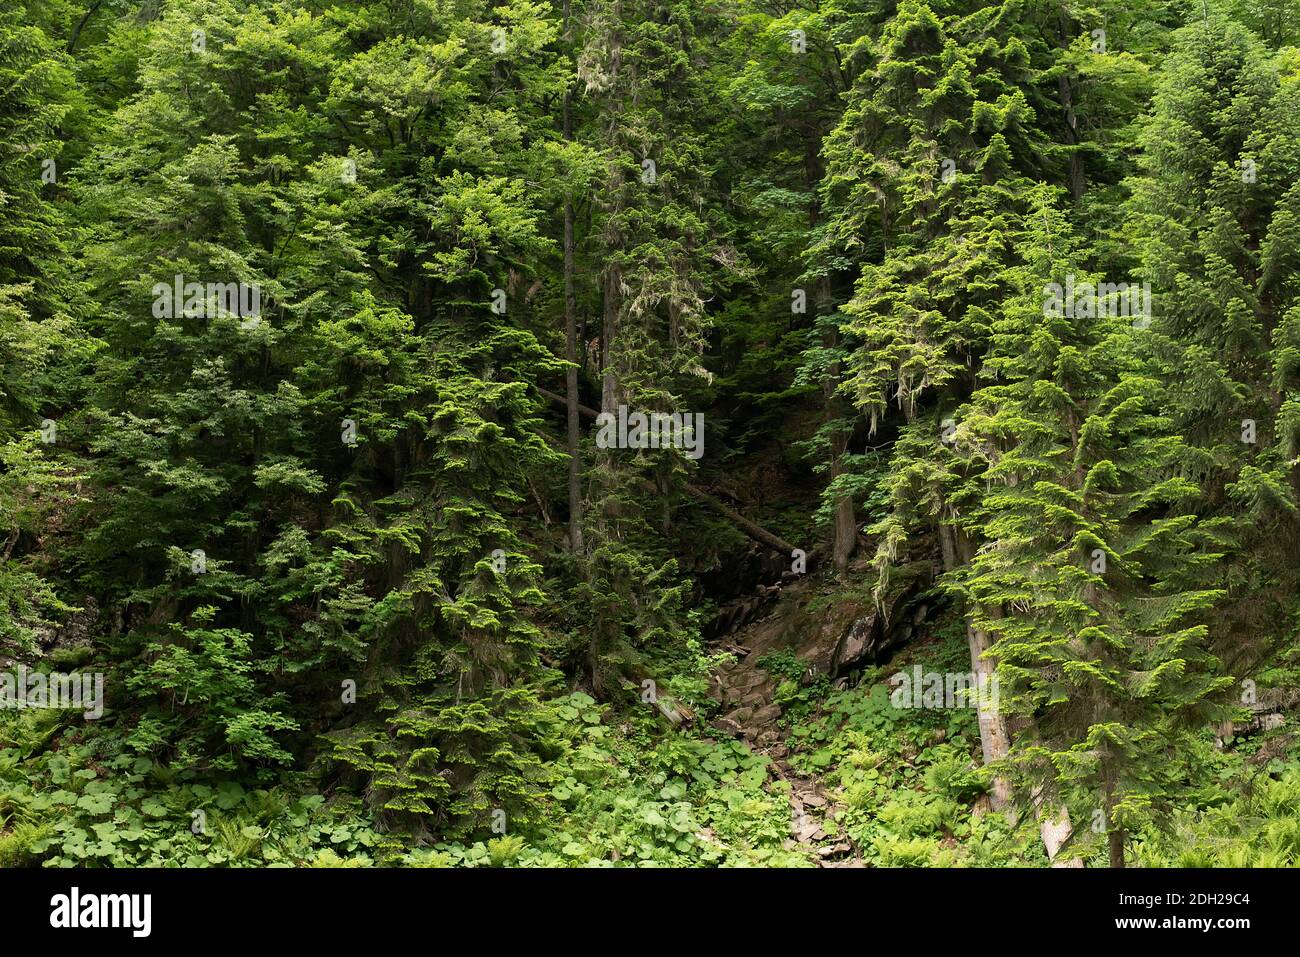 Subtropical rain green forest with many trees Stock Photo